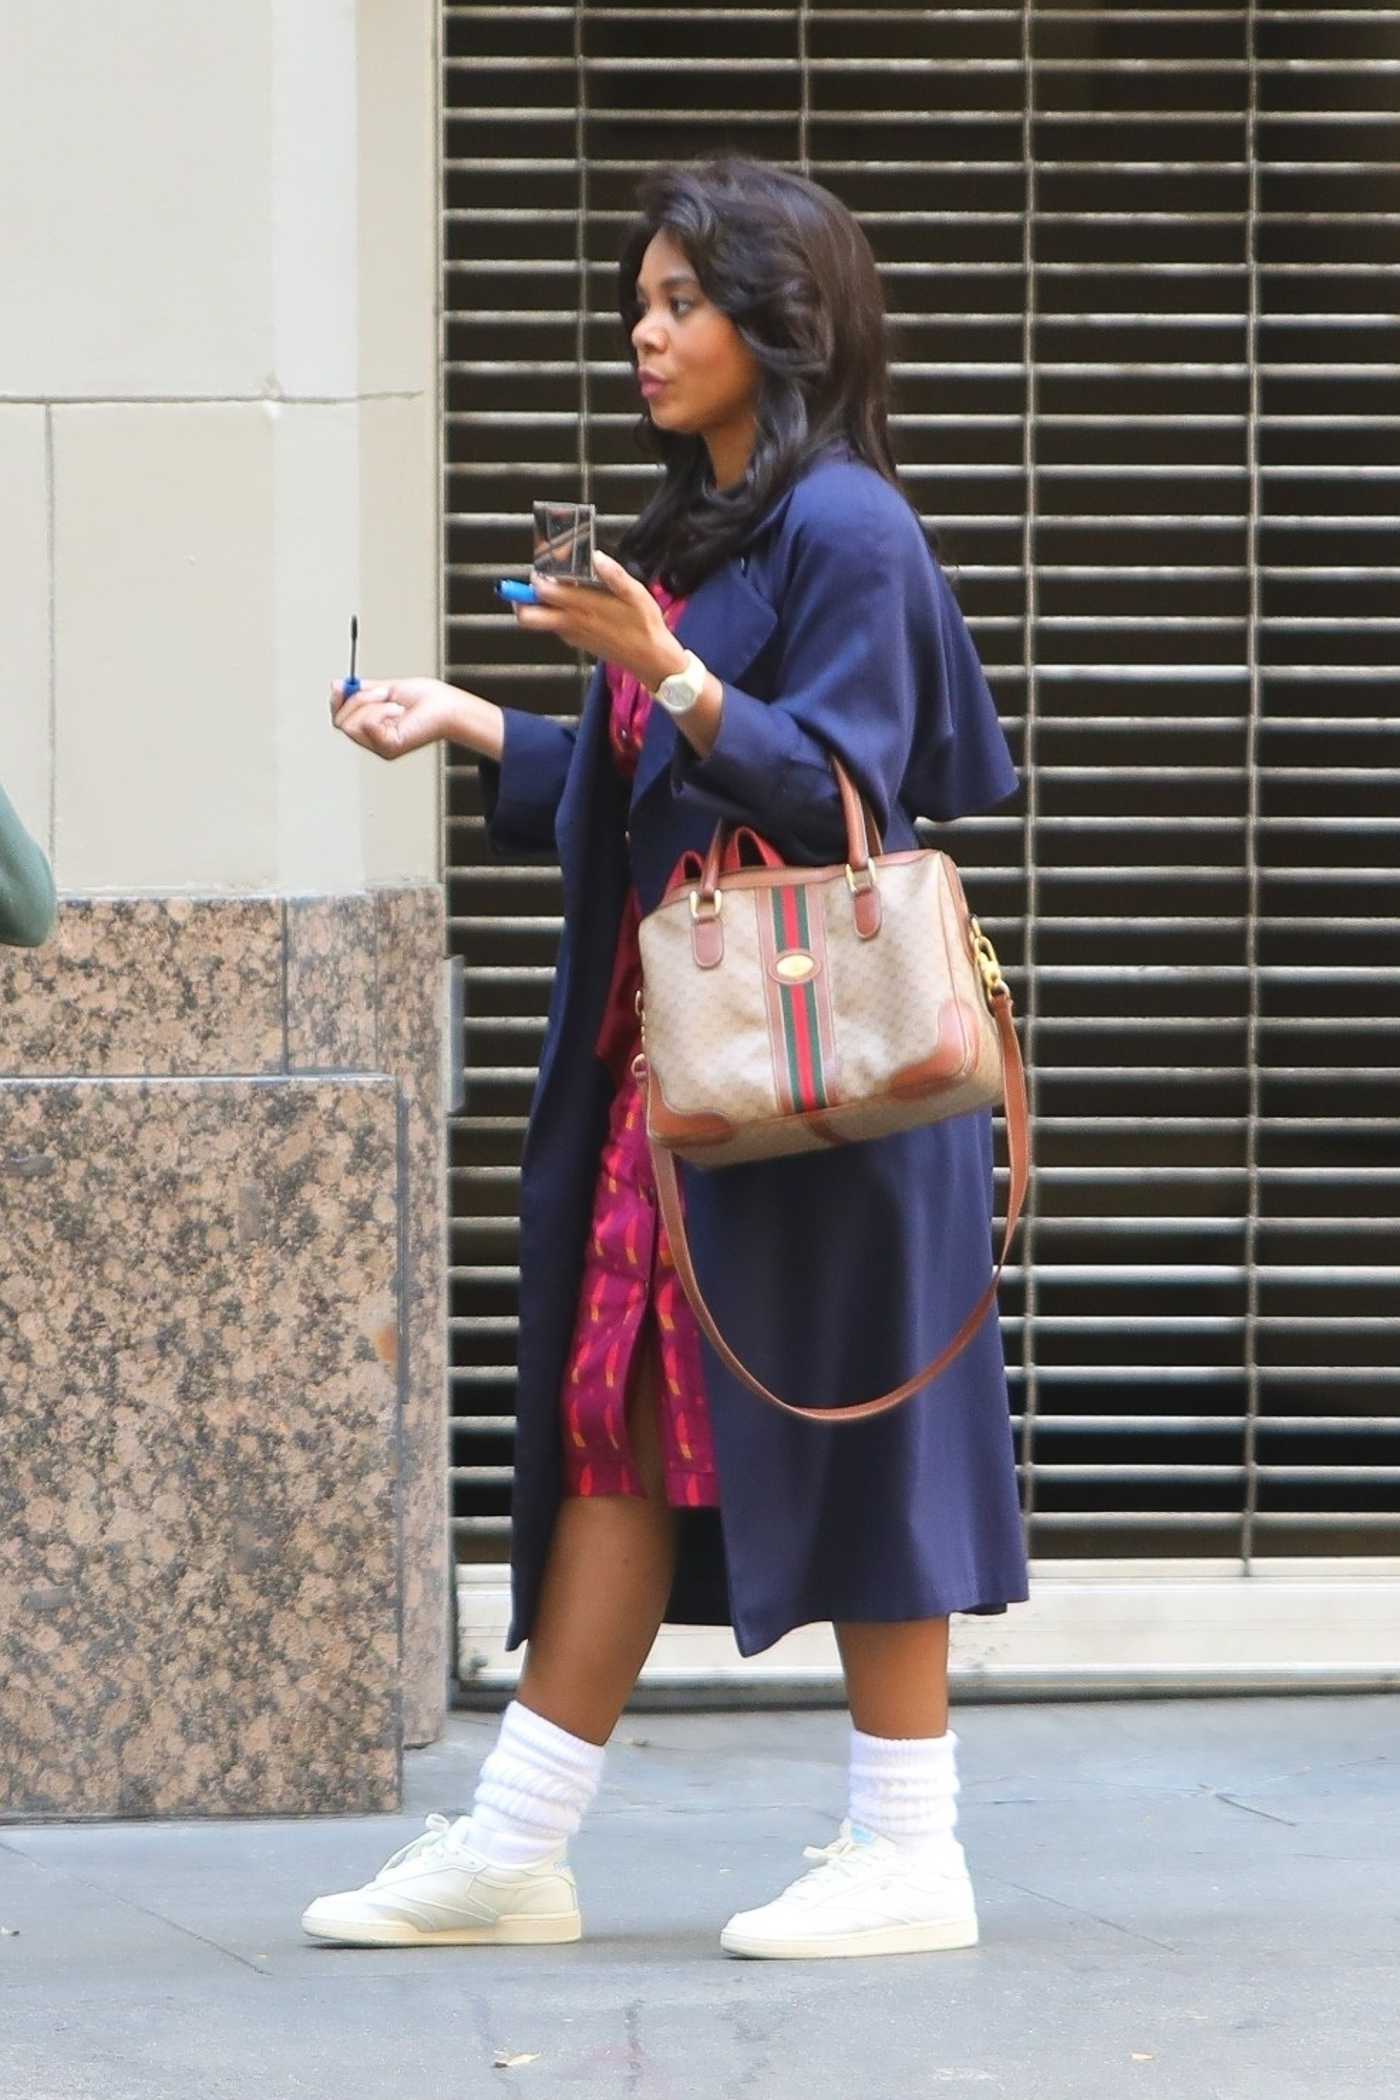 Regina Hall in a White Sneakers Films a Scene for TV Series Black Monday in Downtown Los Angeles 03/24/2021